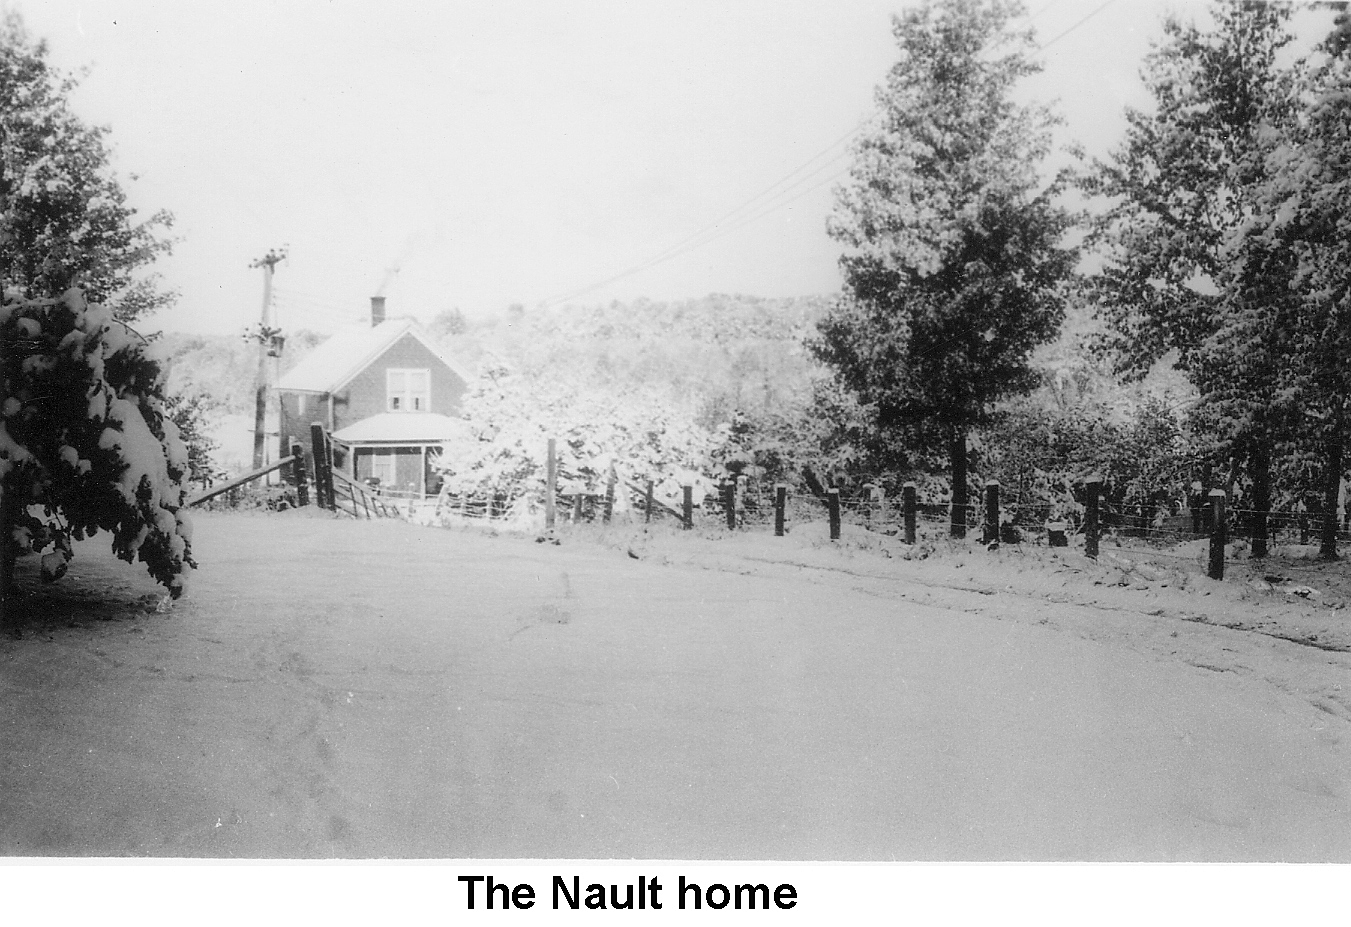 Nault home covered with snow